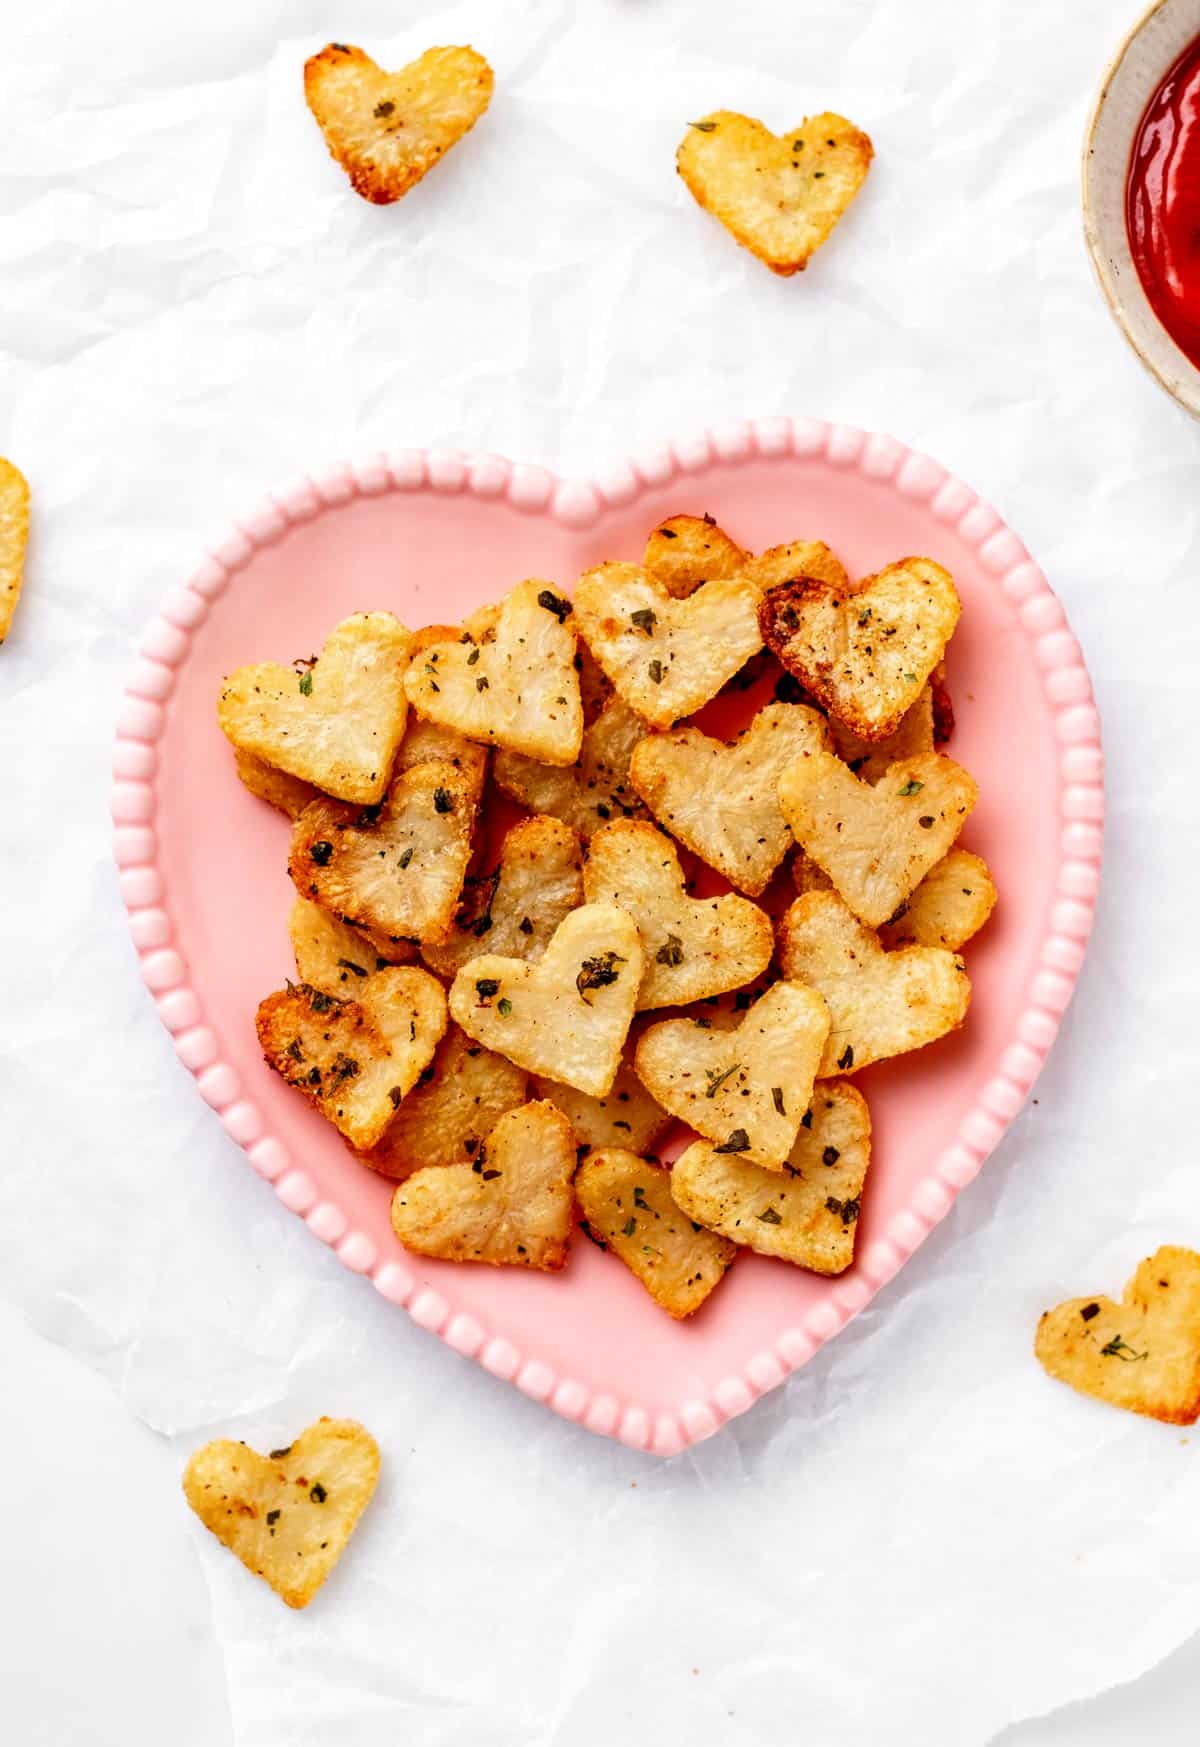 Roasted heart potatoes on a pink heart-shaped plate with ketchup.